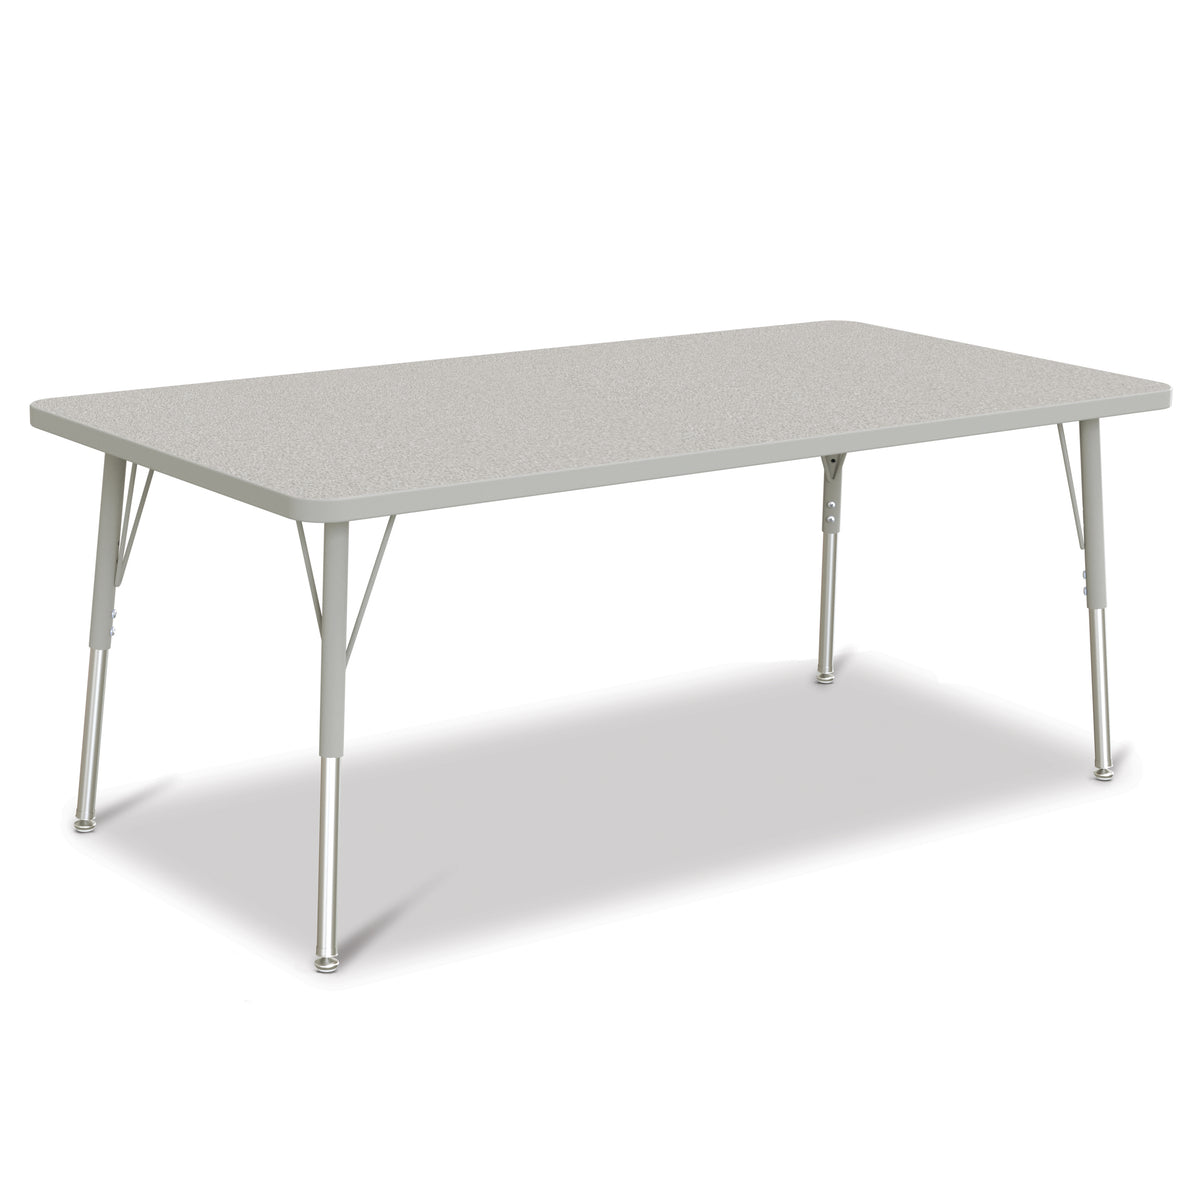 6408JCA000, Berries Rectangle Activity Table - 30" X 60", A-height - Freckled Gray/Gray/Gray